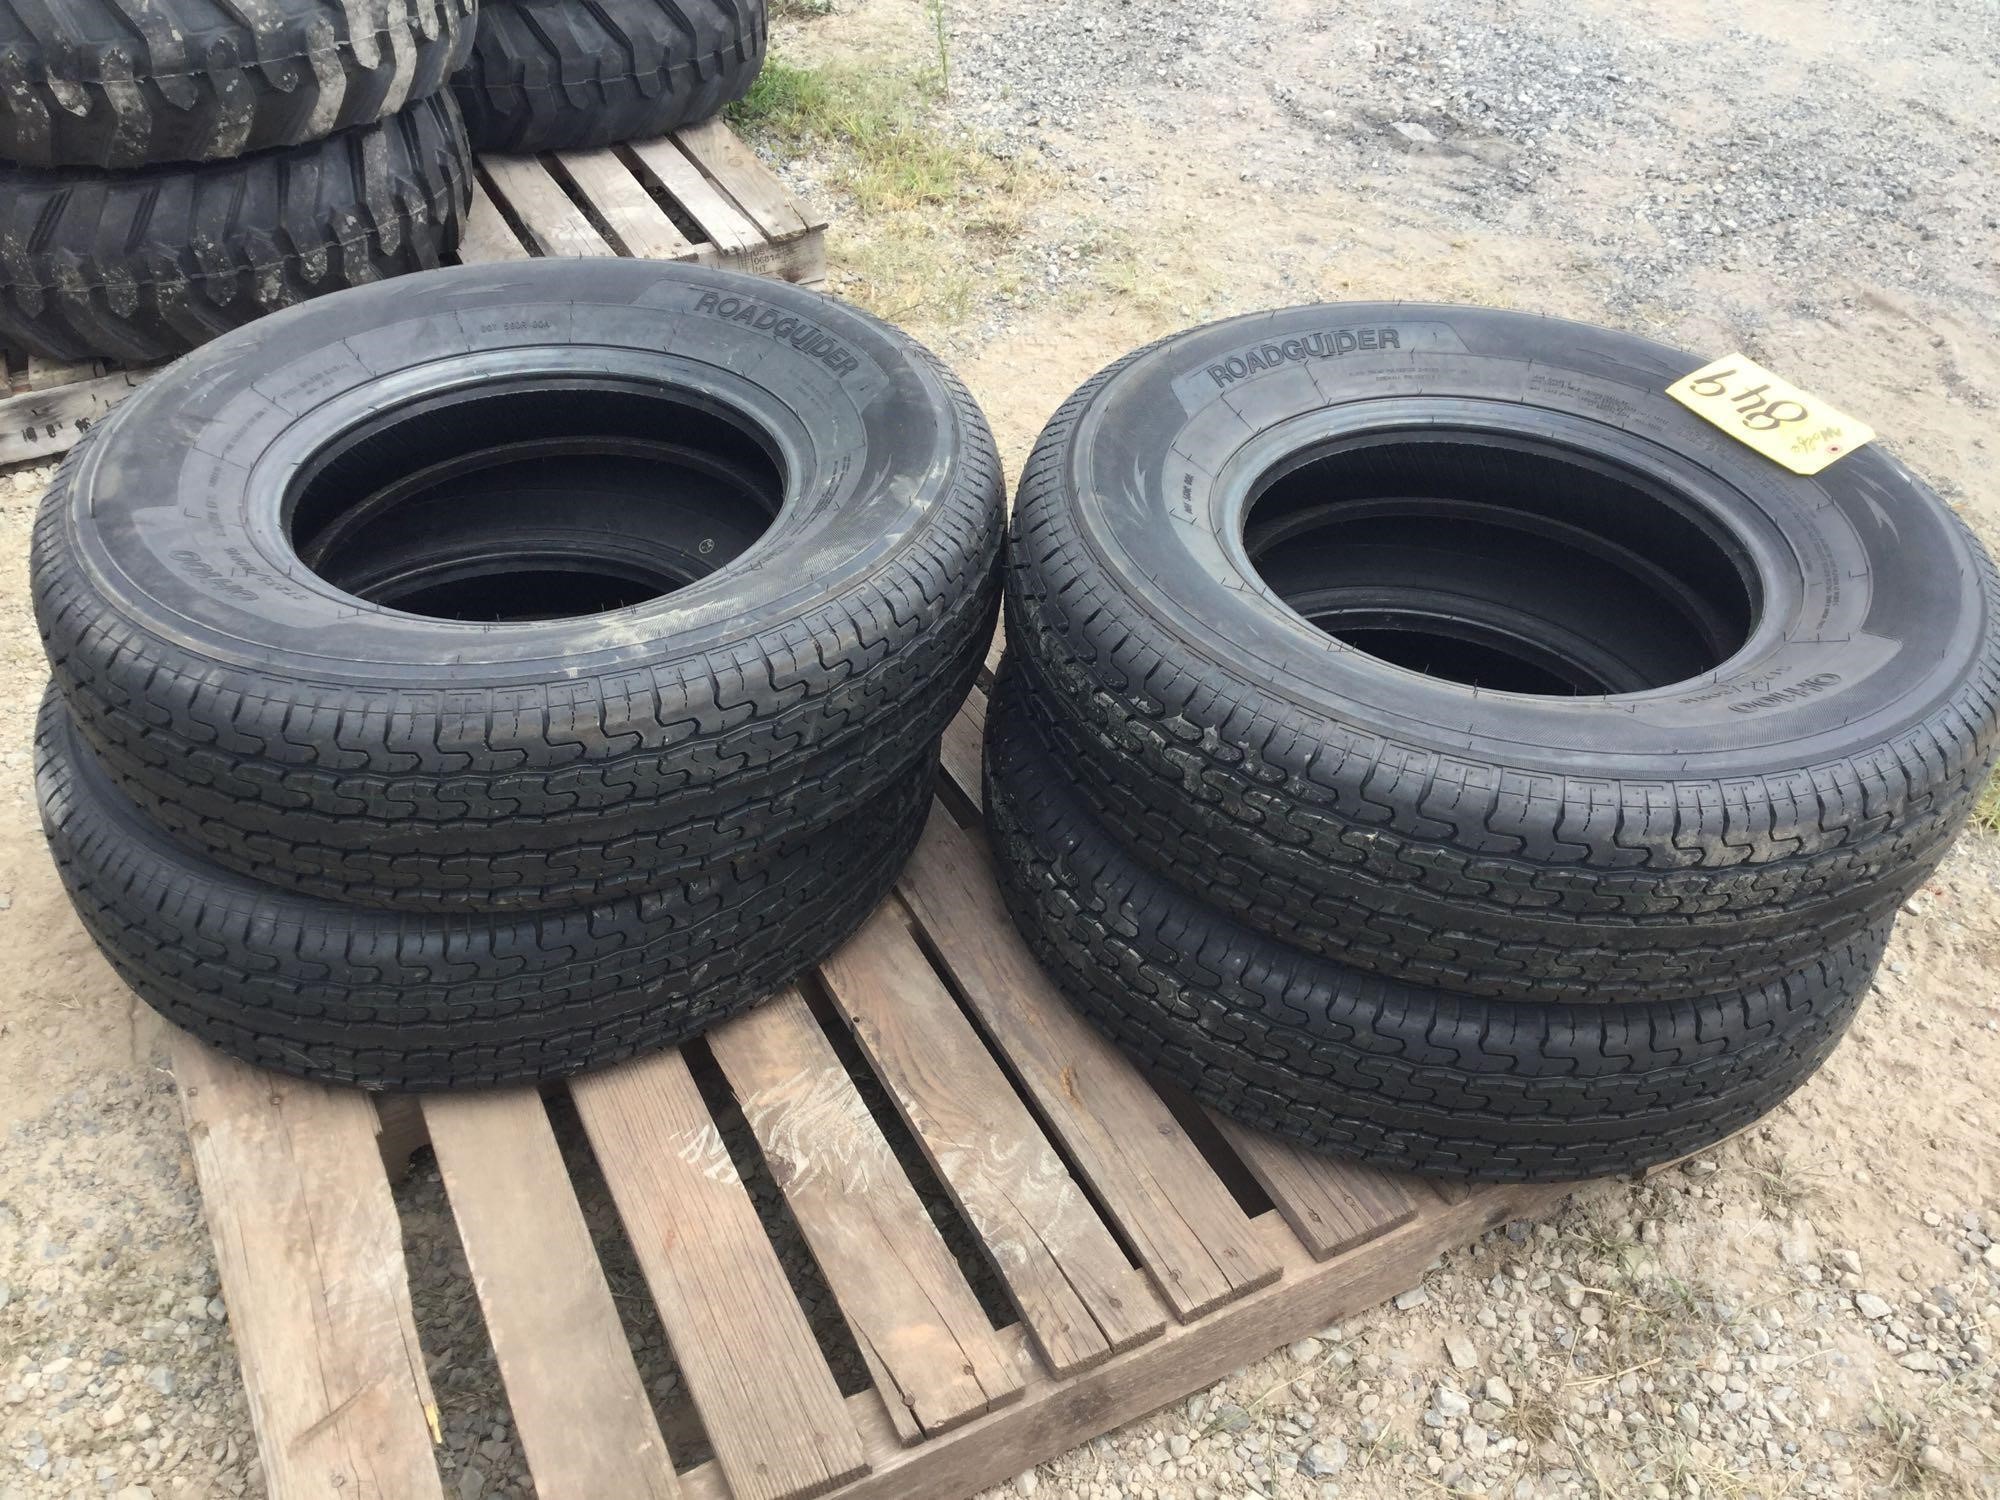 St 235 80r16 Tires Other Items Auction, Memory Foam Rug Pad 5 215 75 R15 Tires